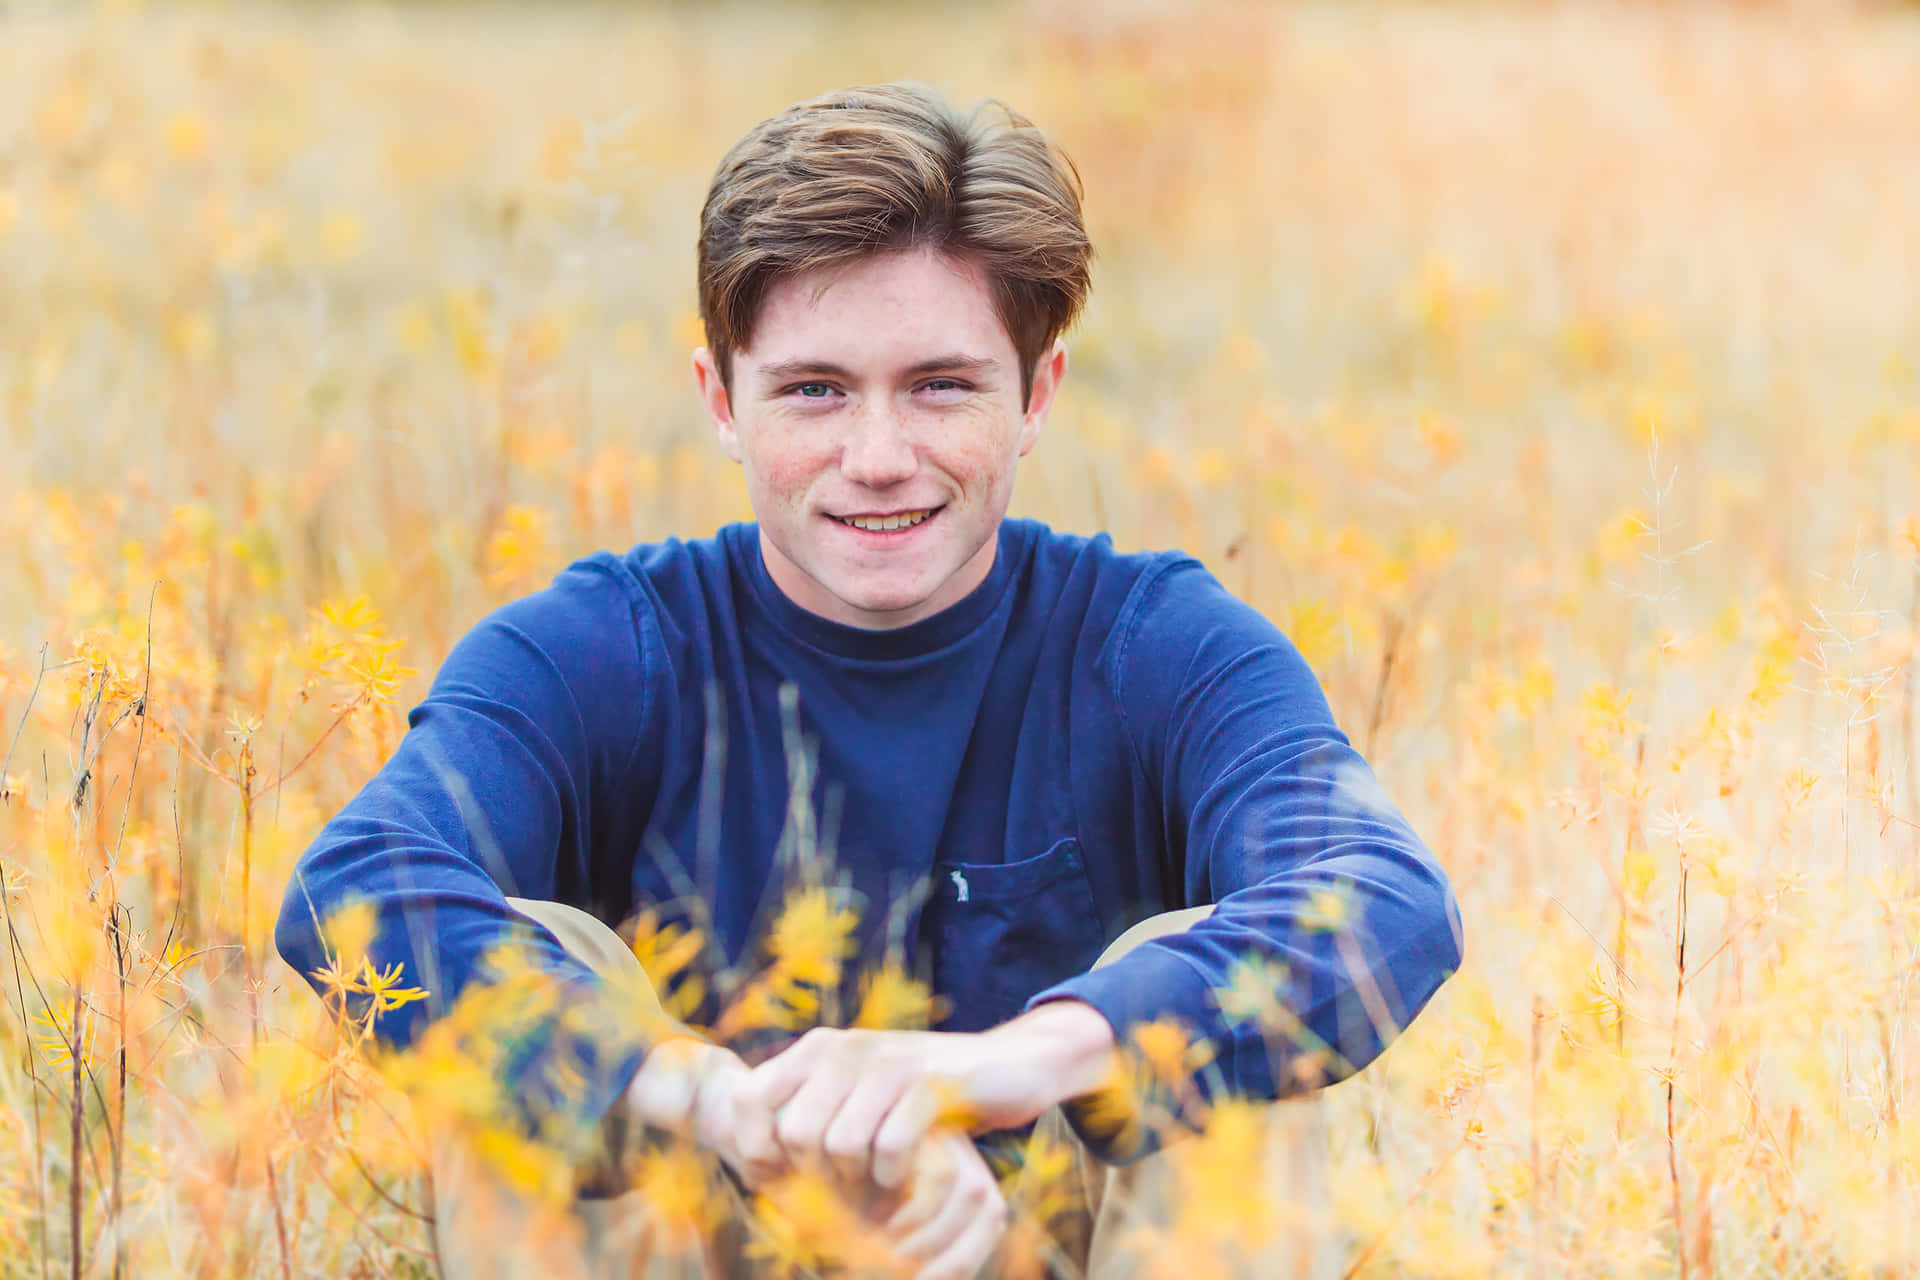 Capture lasting memories with the perfect Fall Senior portrait.